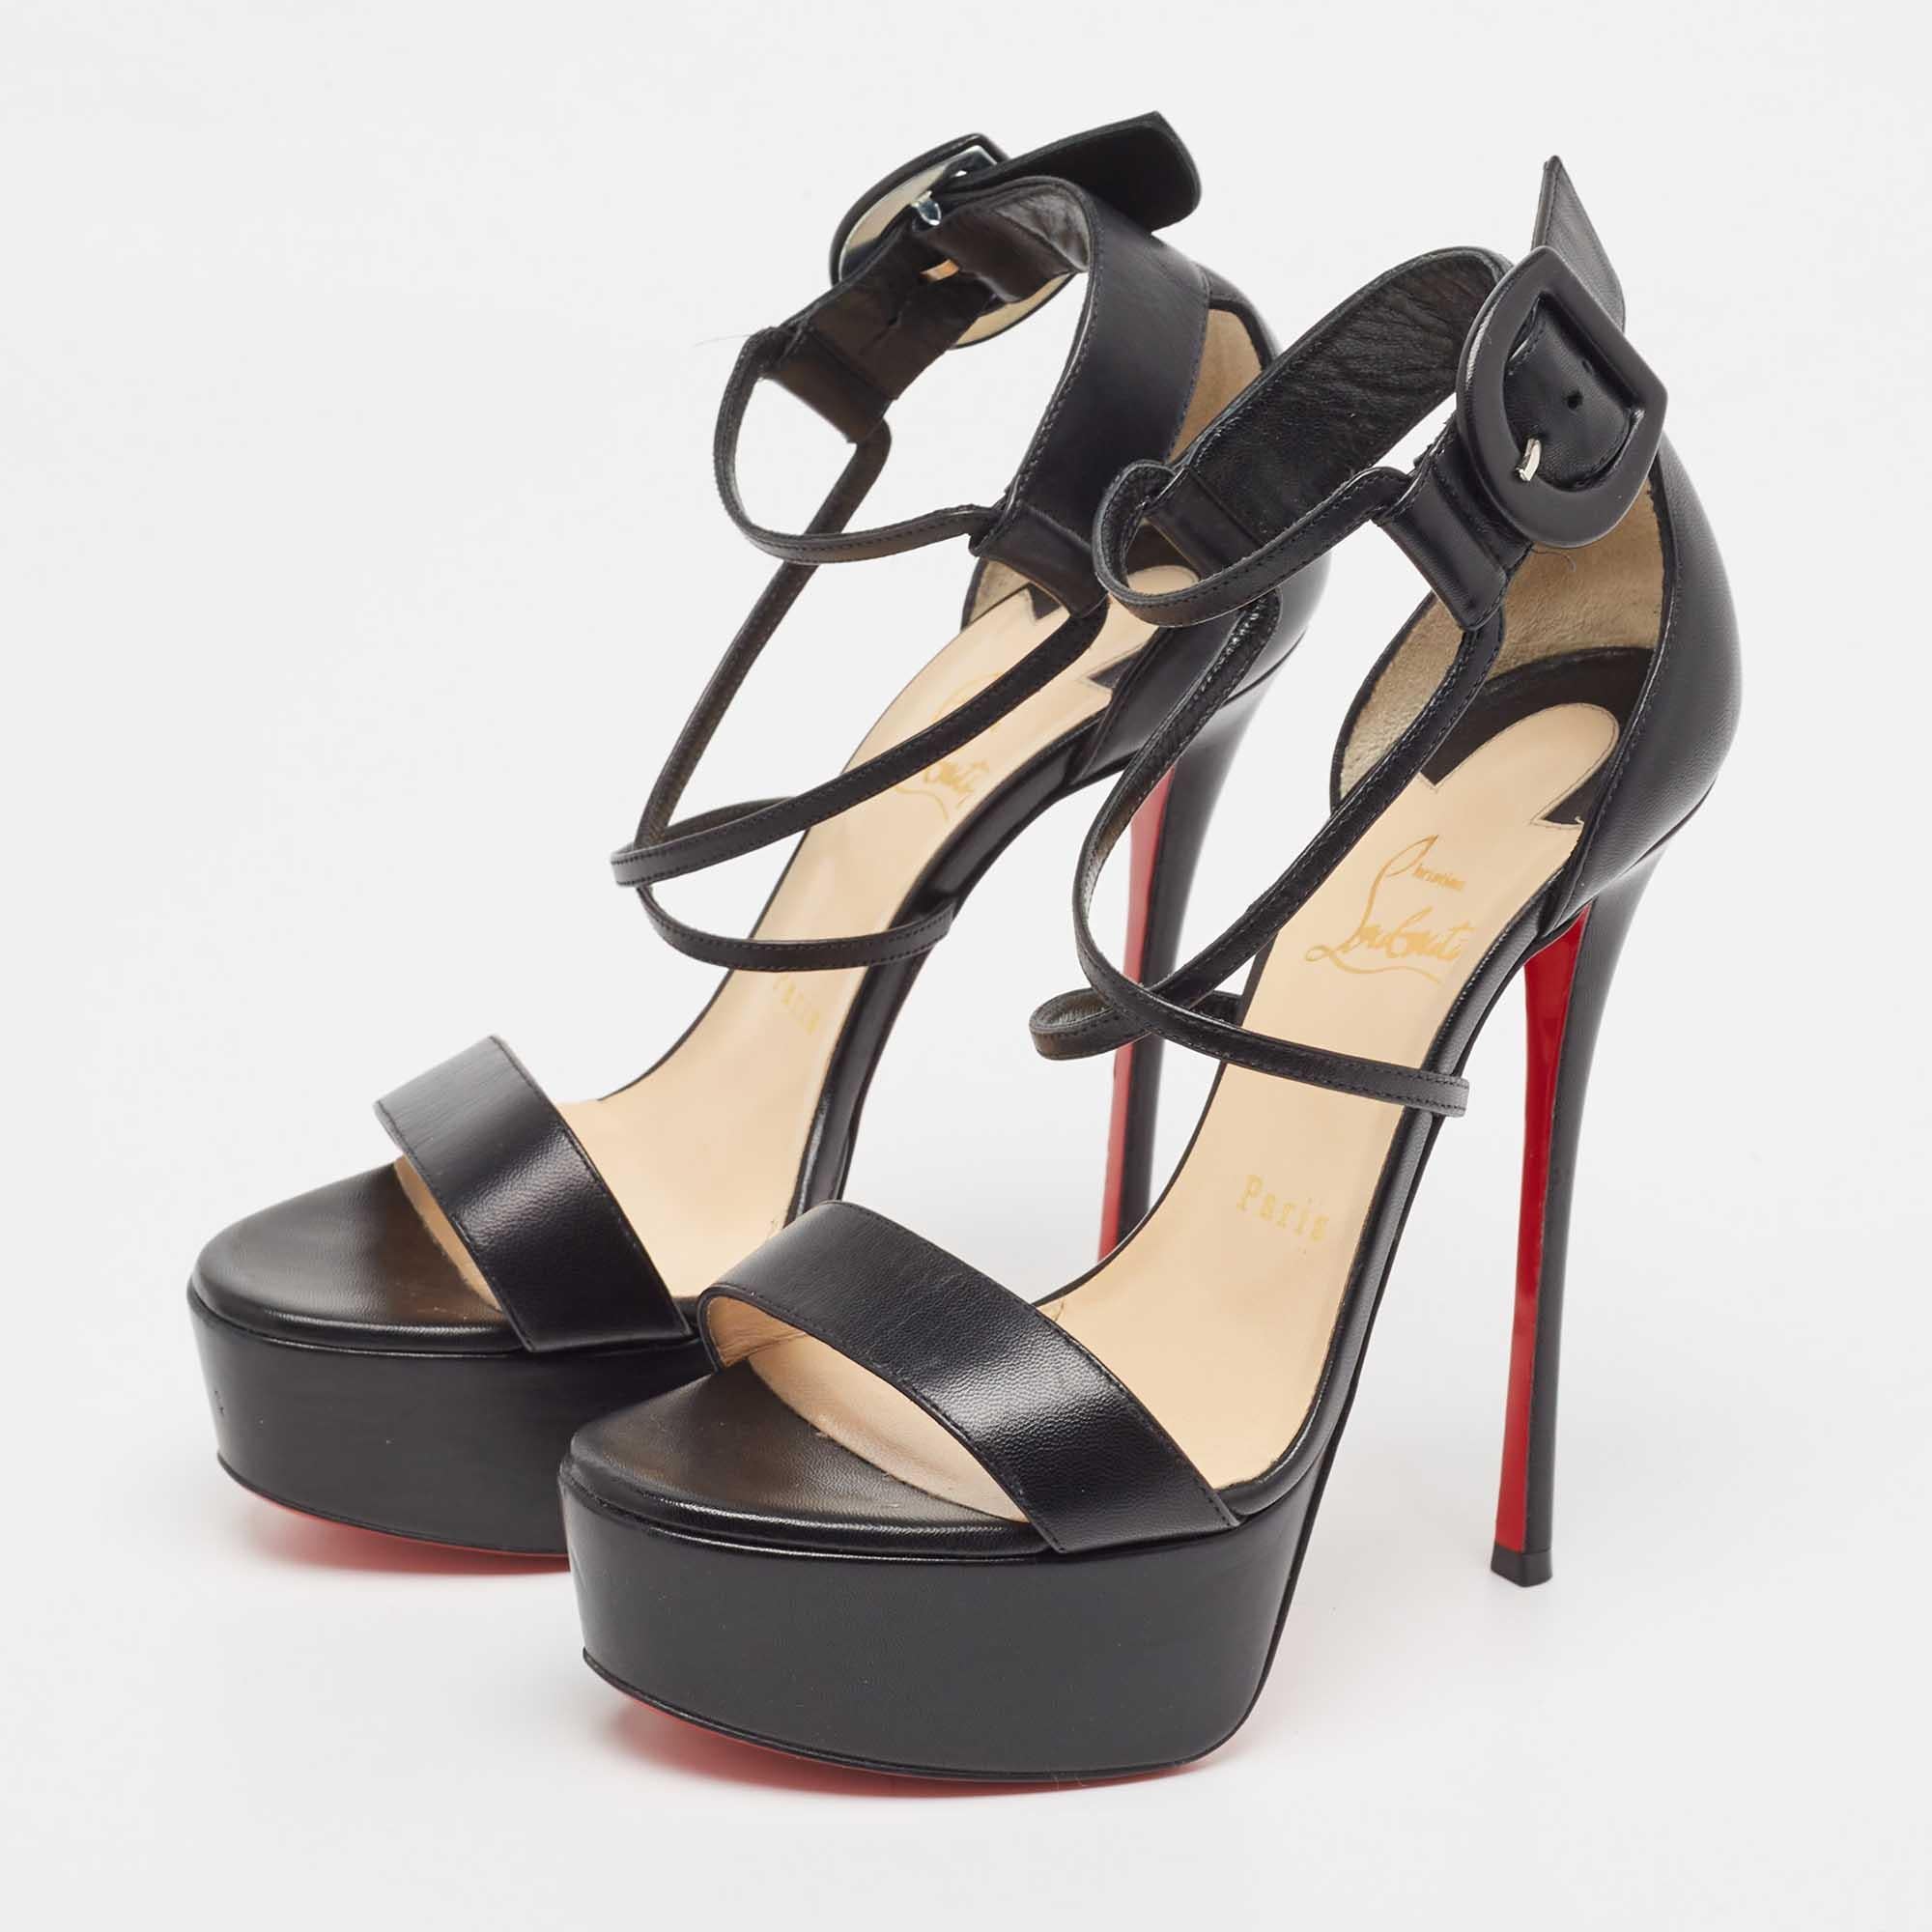 Christian Louboutin Black Leather Choca Sandals Size 37.5 For Sale 2